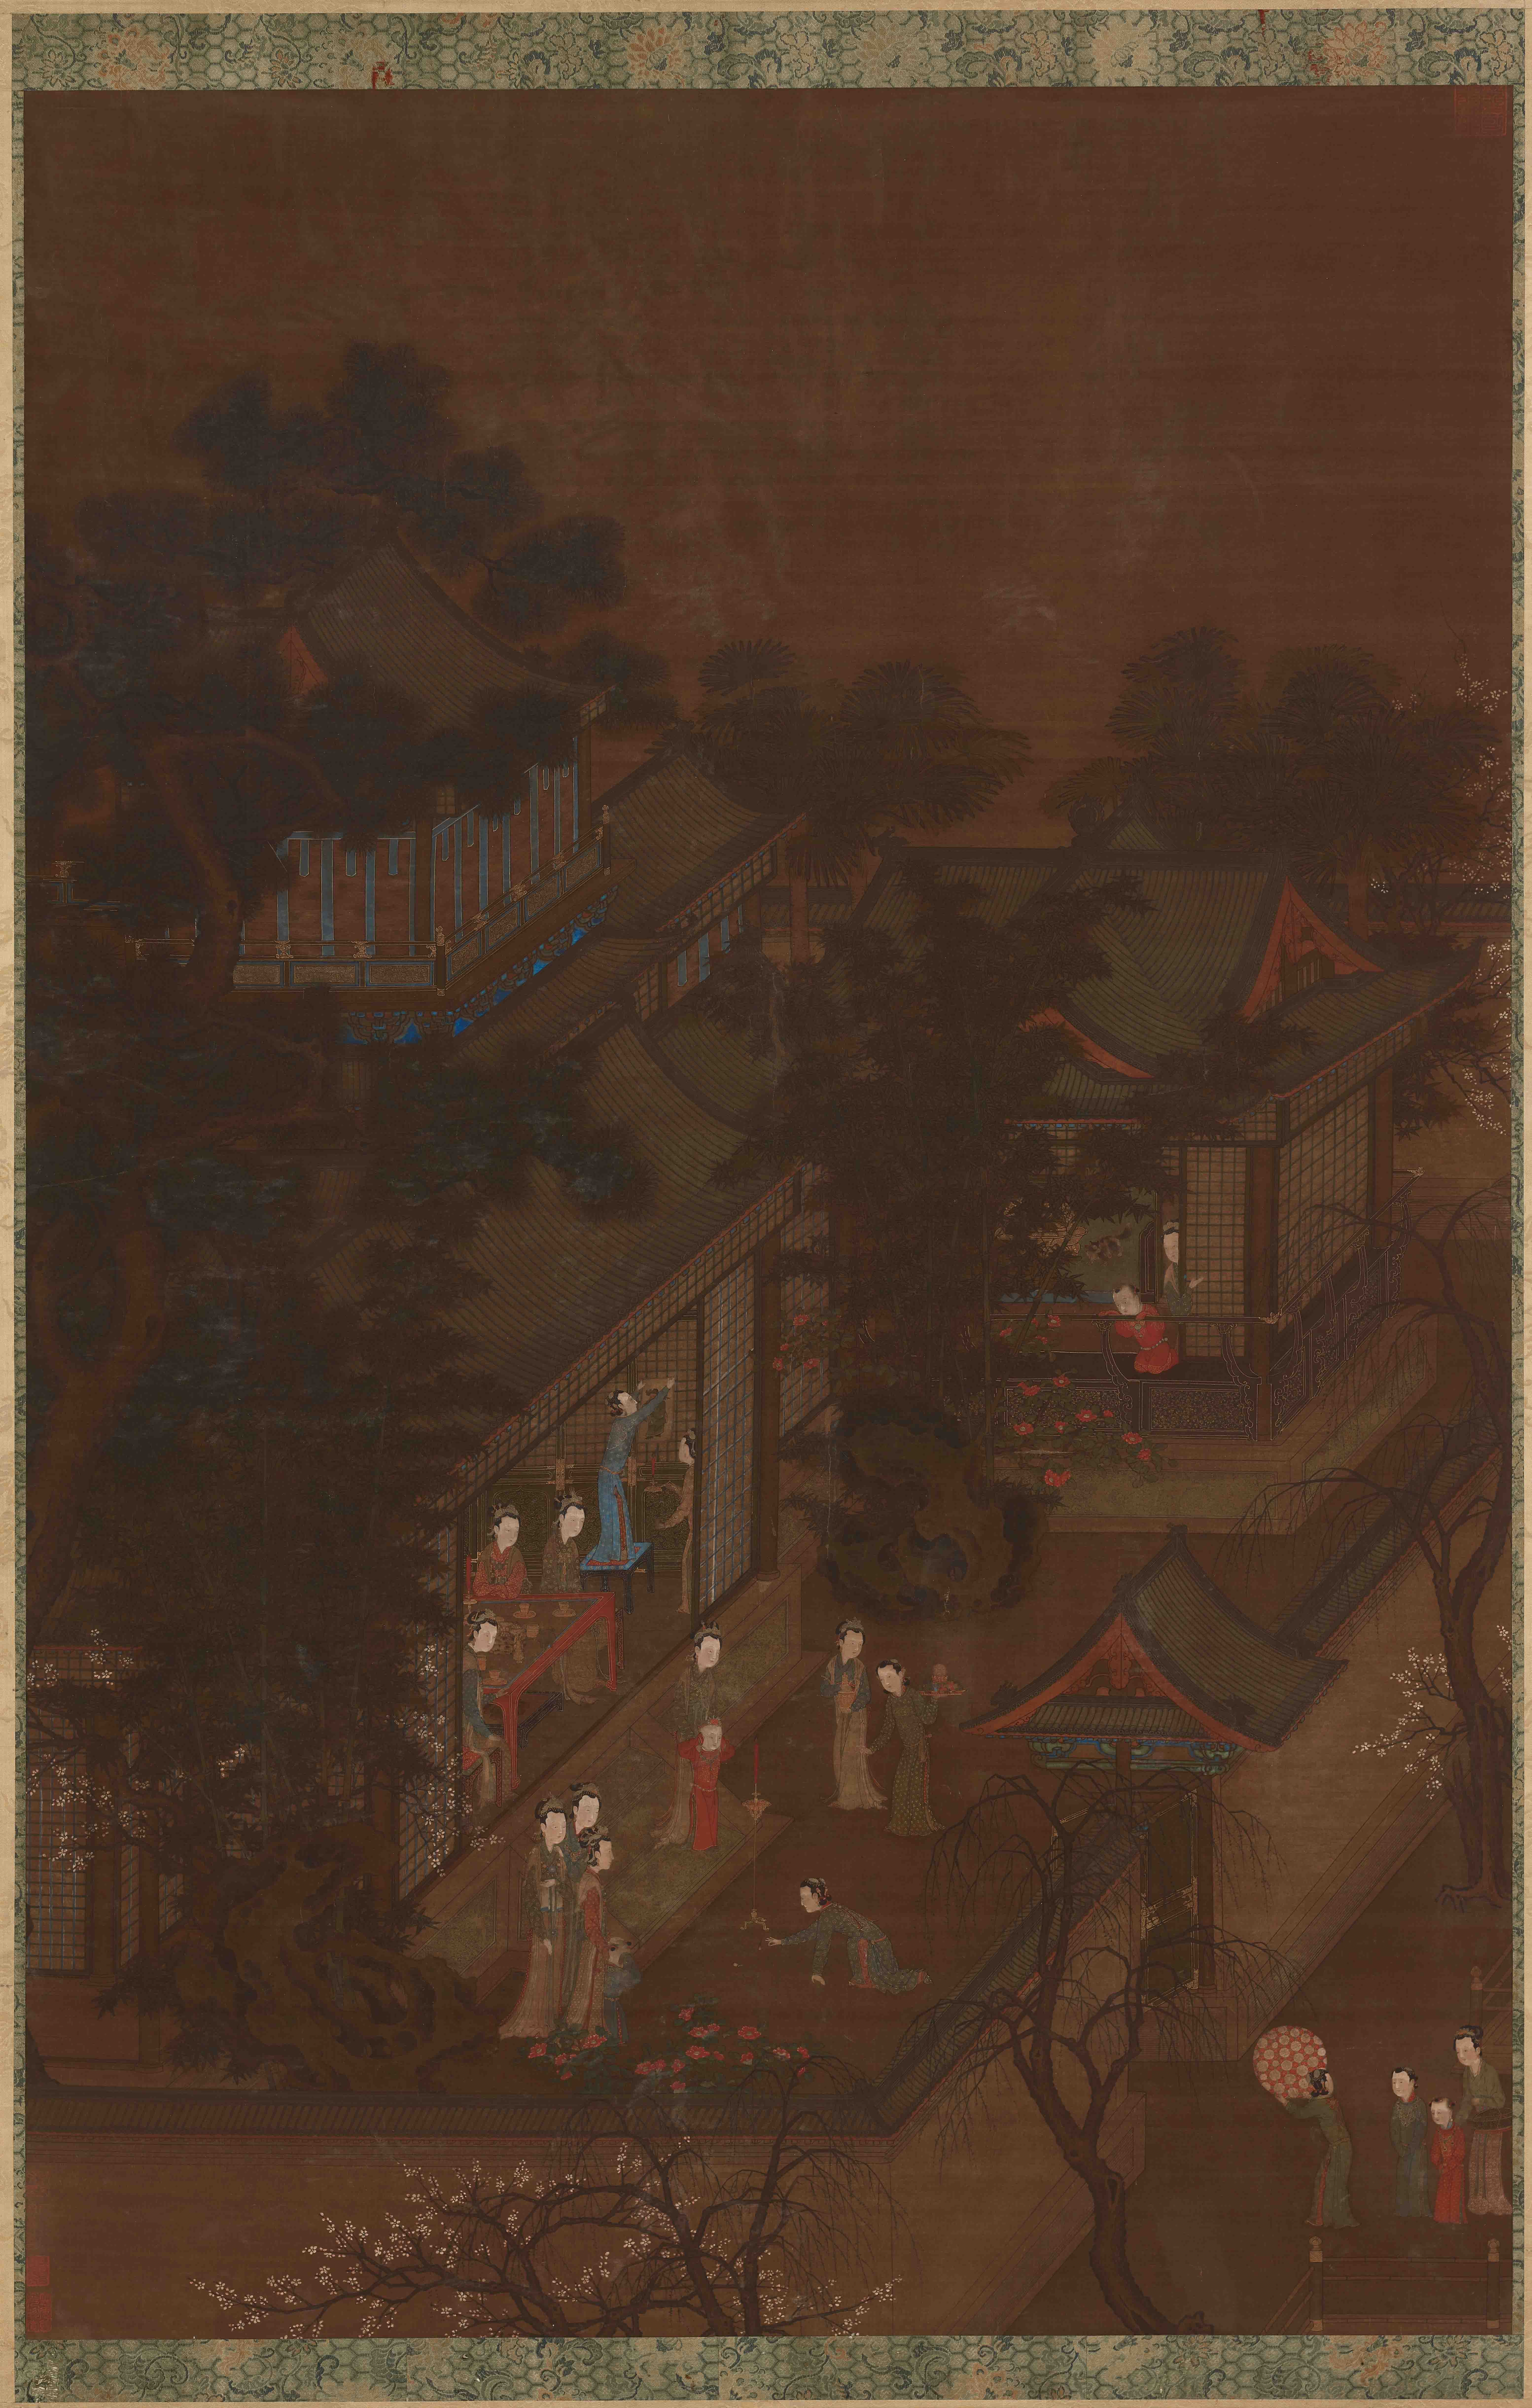 Formerly attributed to Yan Liben (c. 600-674), Palace Women and Children Celebrating the New Year, Ming dynasty, 15th-16th century, ink and color on silk, China, 160.3 x 106.2 cm (Freer Gallery of Art, Smithsonian Institution, Washington, DC: Gift of Charles Lang Freer, F1916.403)